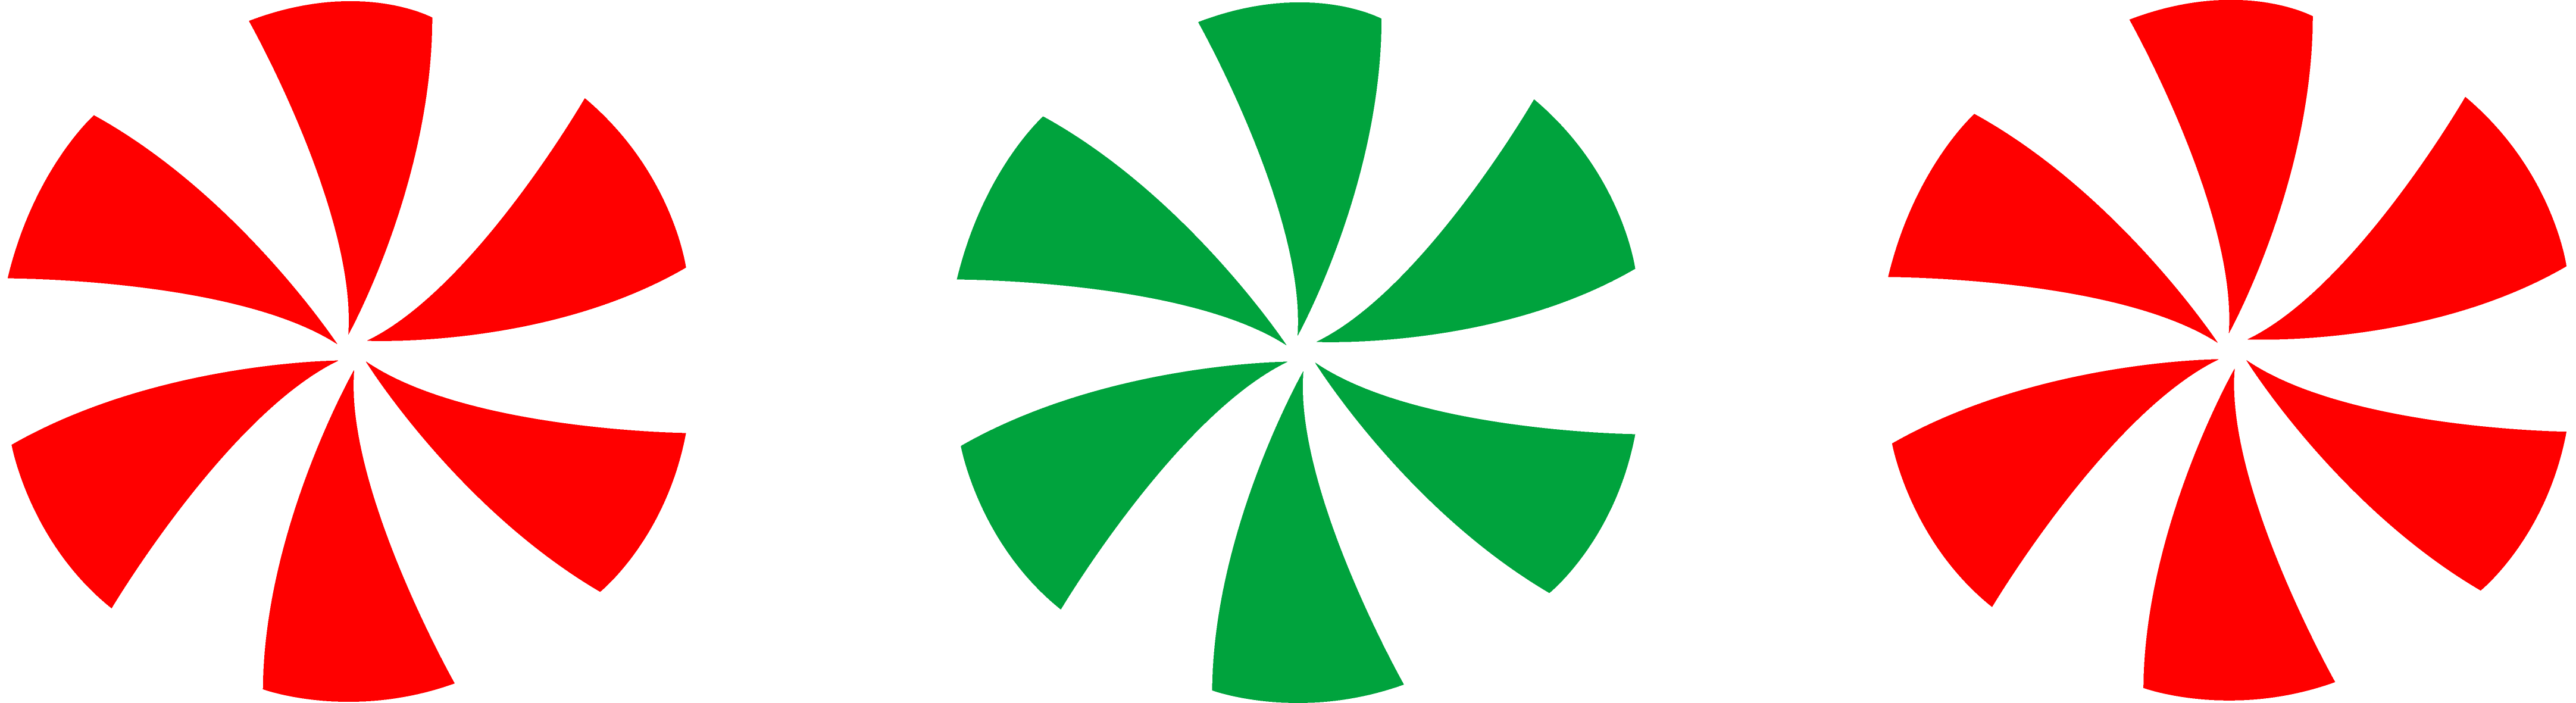 A Green And White Circular Object